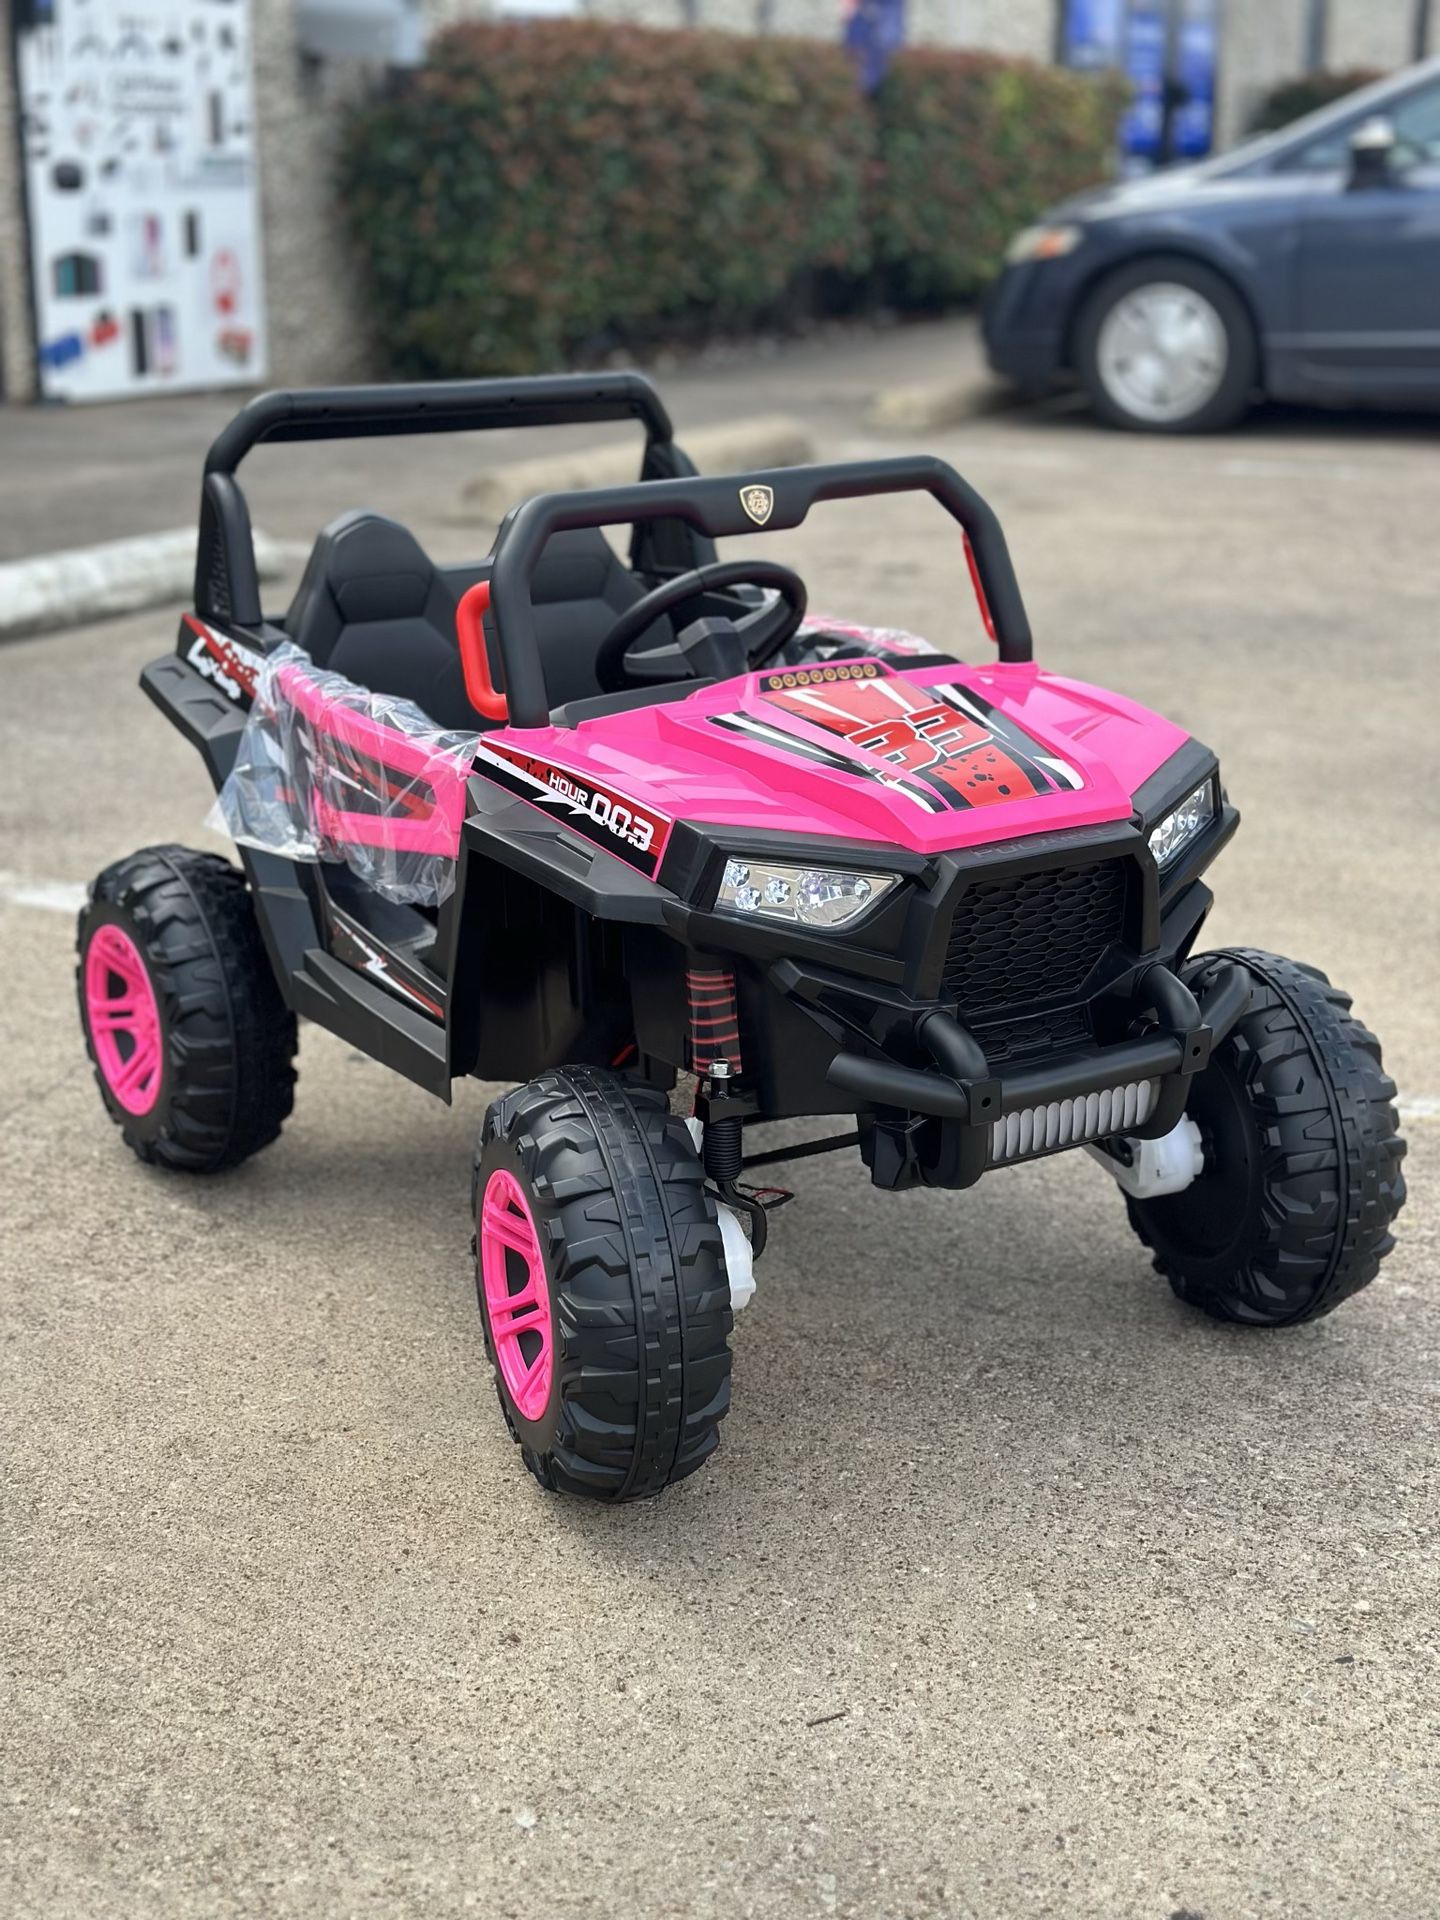 12V jeep with remote control For Kids 